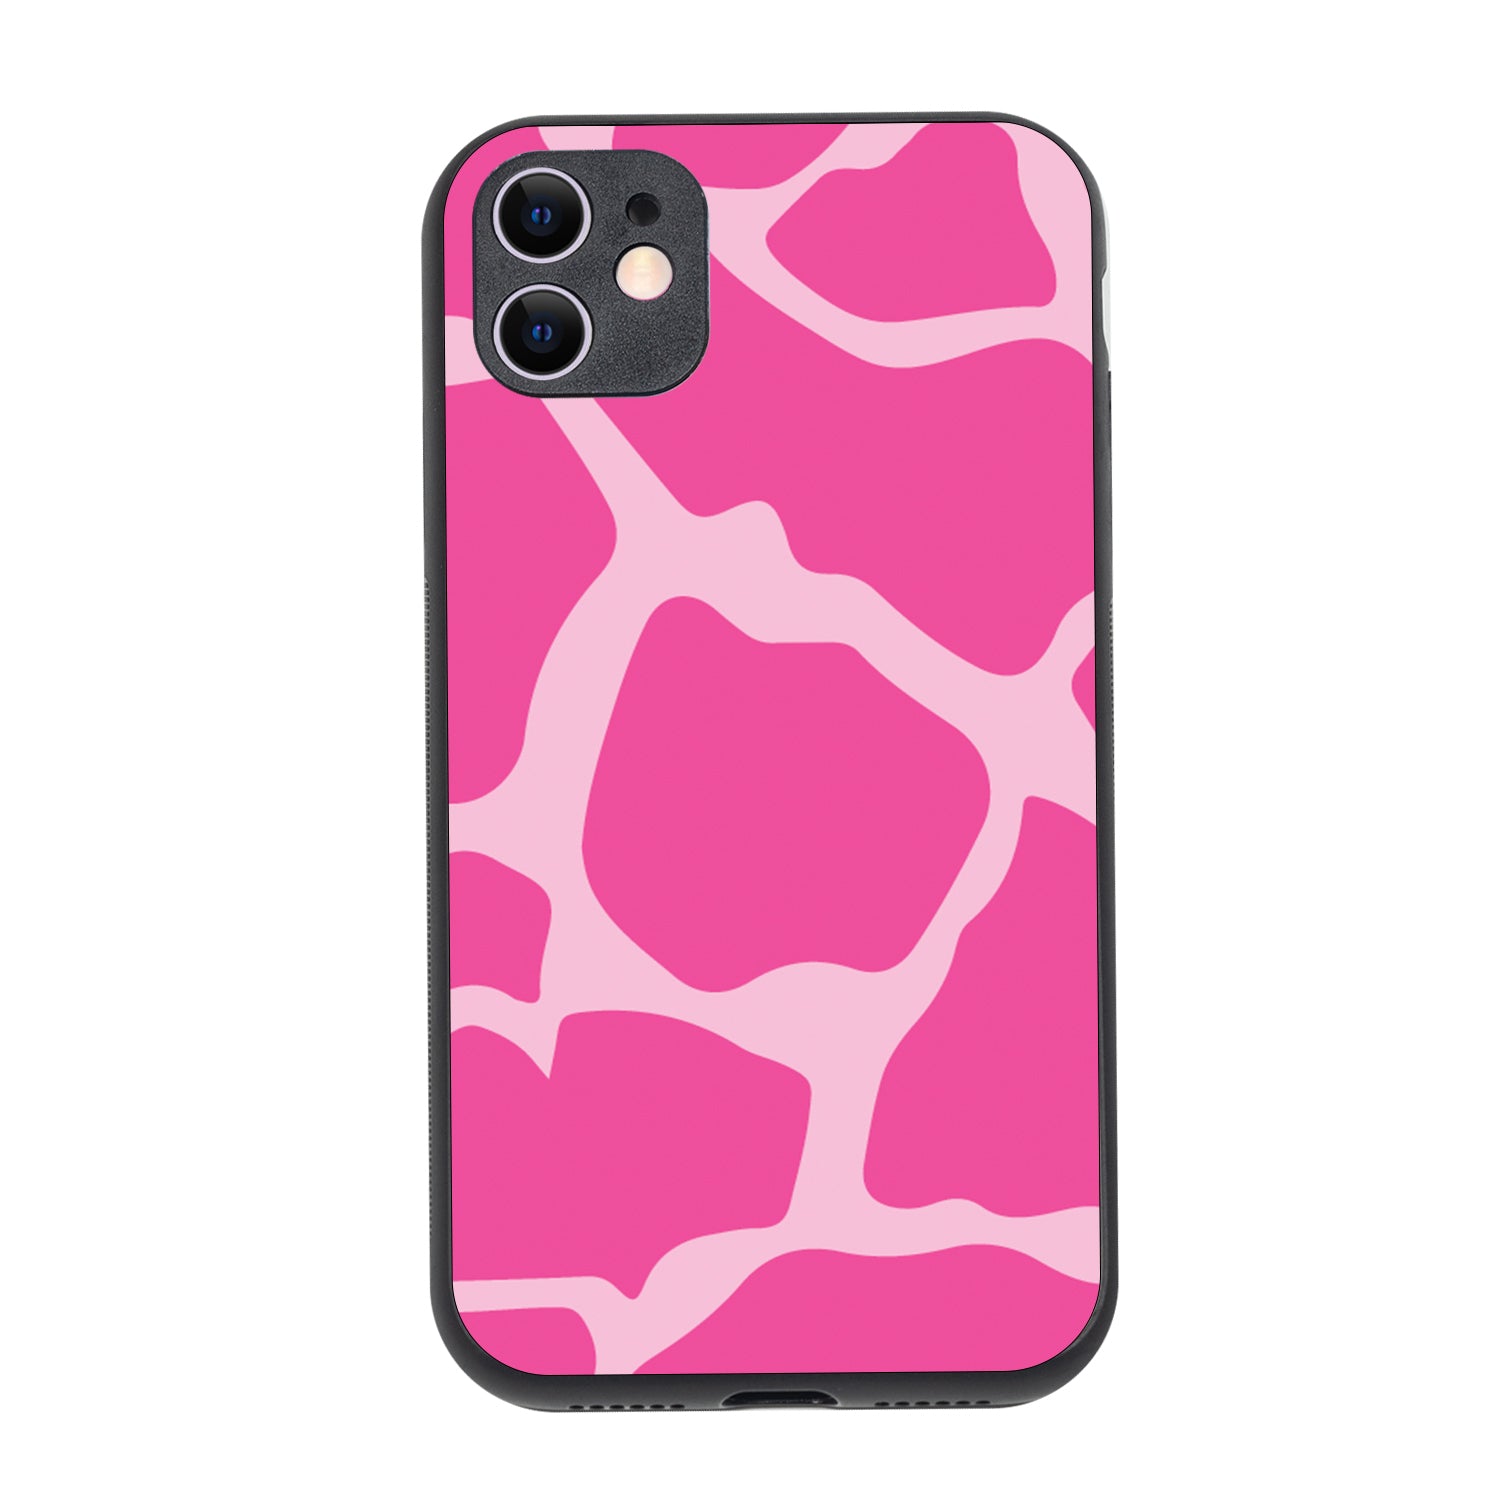 Pink Patch Design iPhone 11 Case